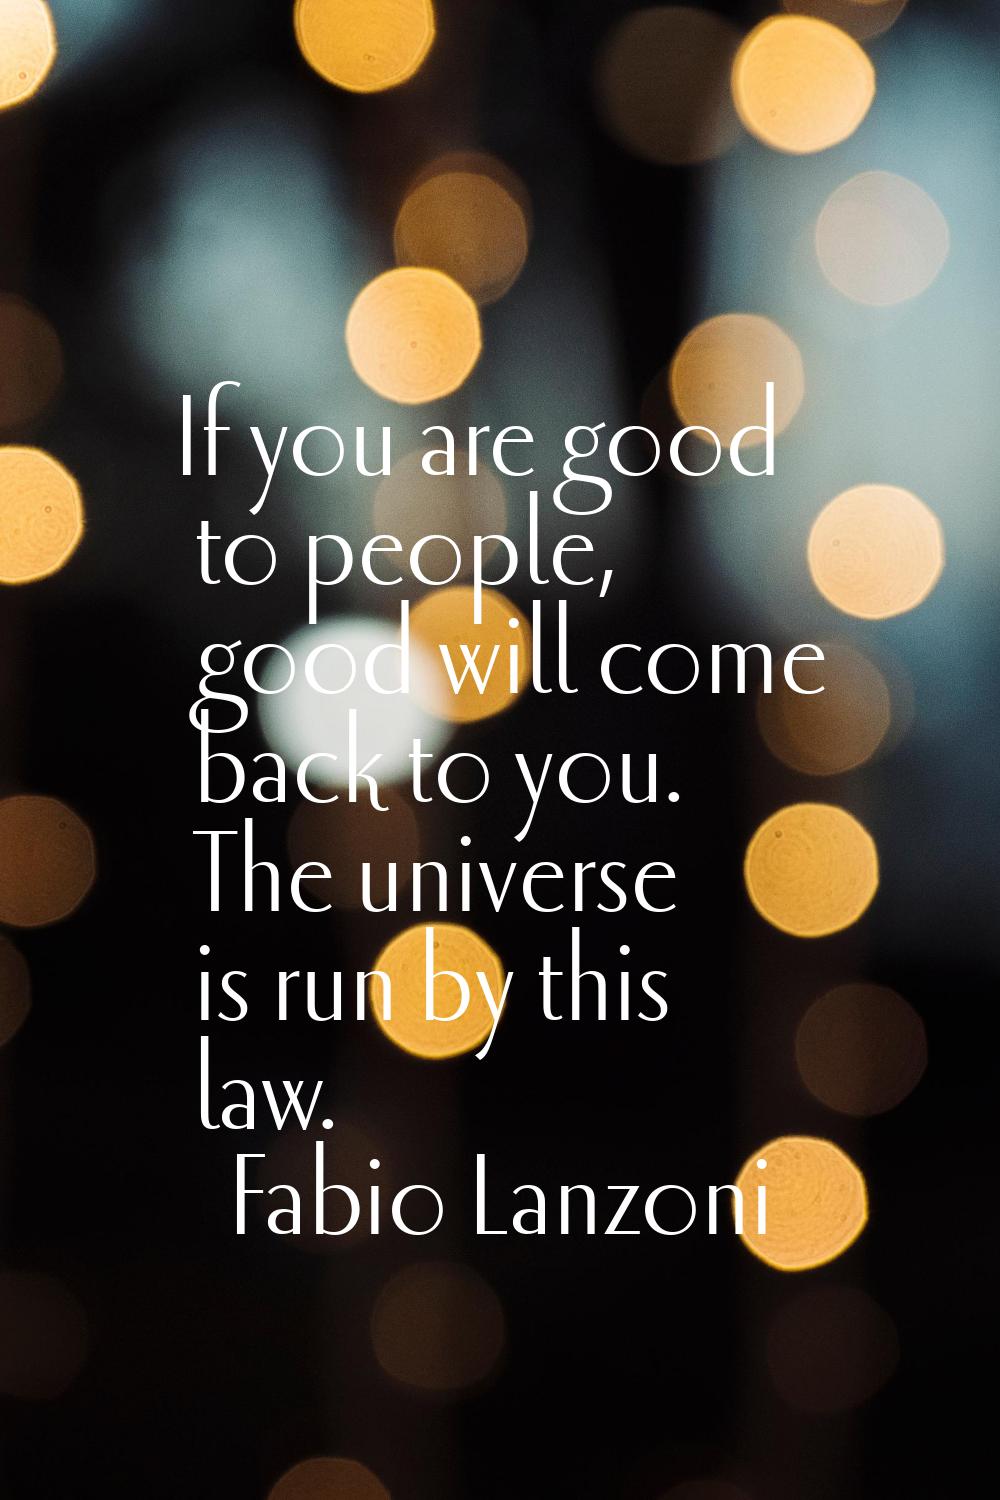 If you are good to people, good will come back to you. The universe is run by this law.